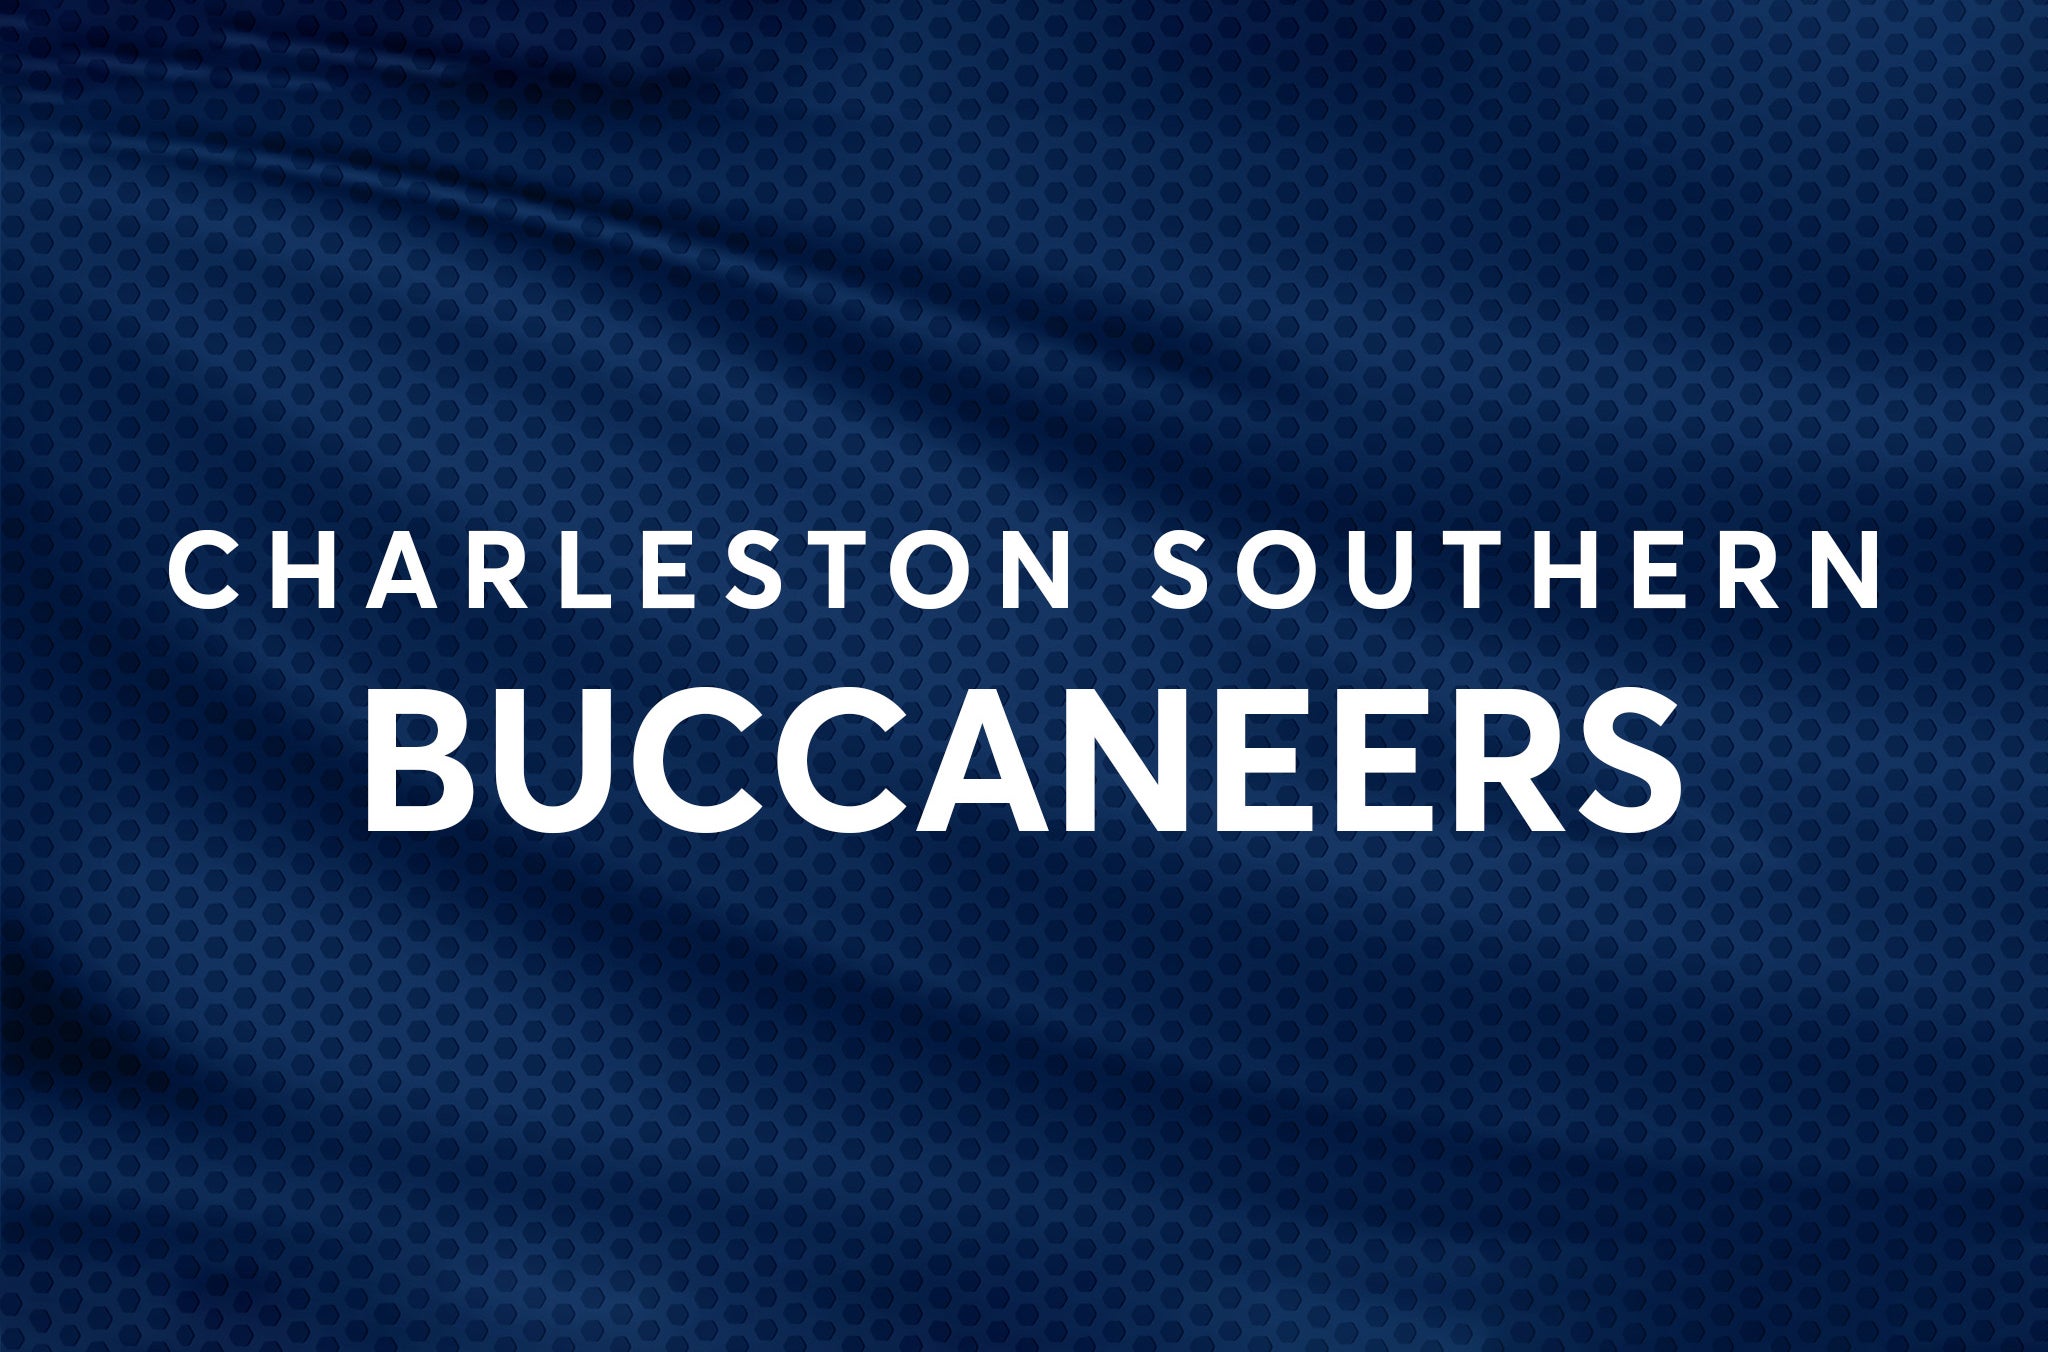 Charleston Southern Buccaneers Football vs. William and Mary Tribe Football